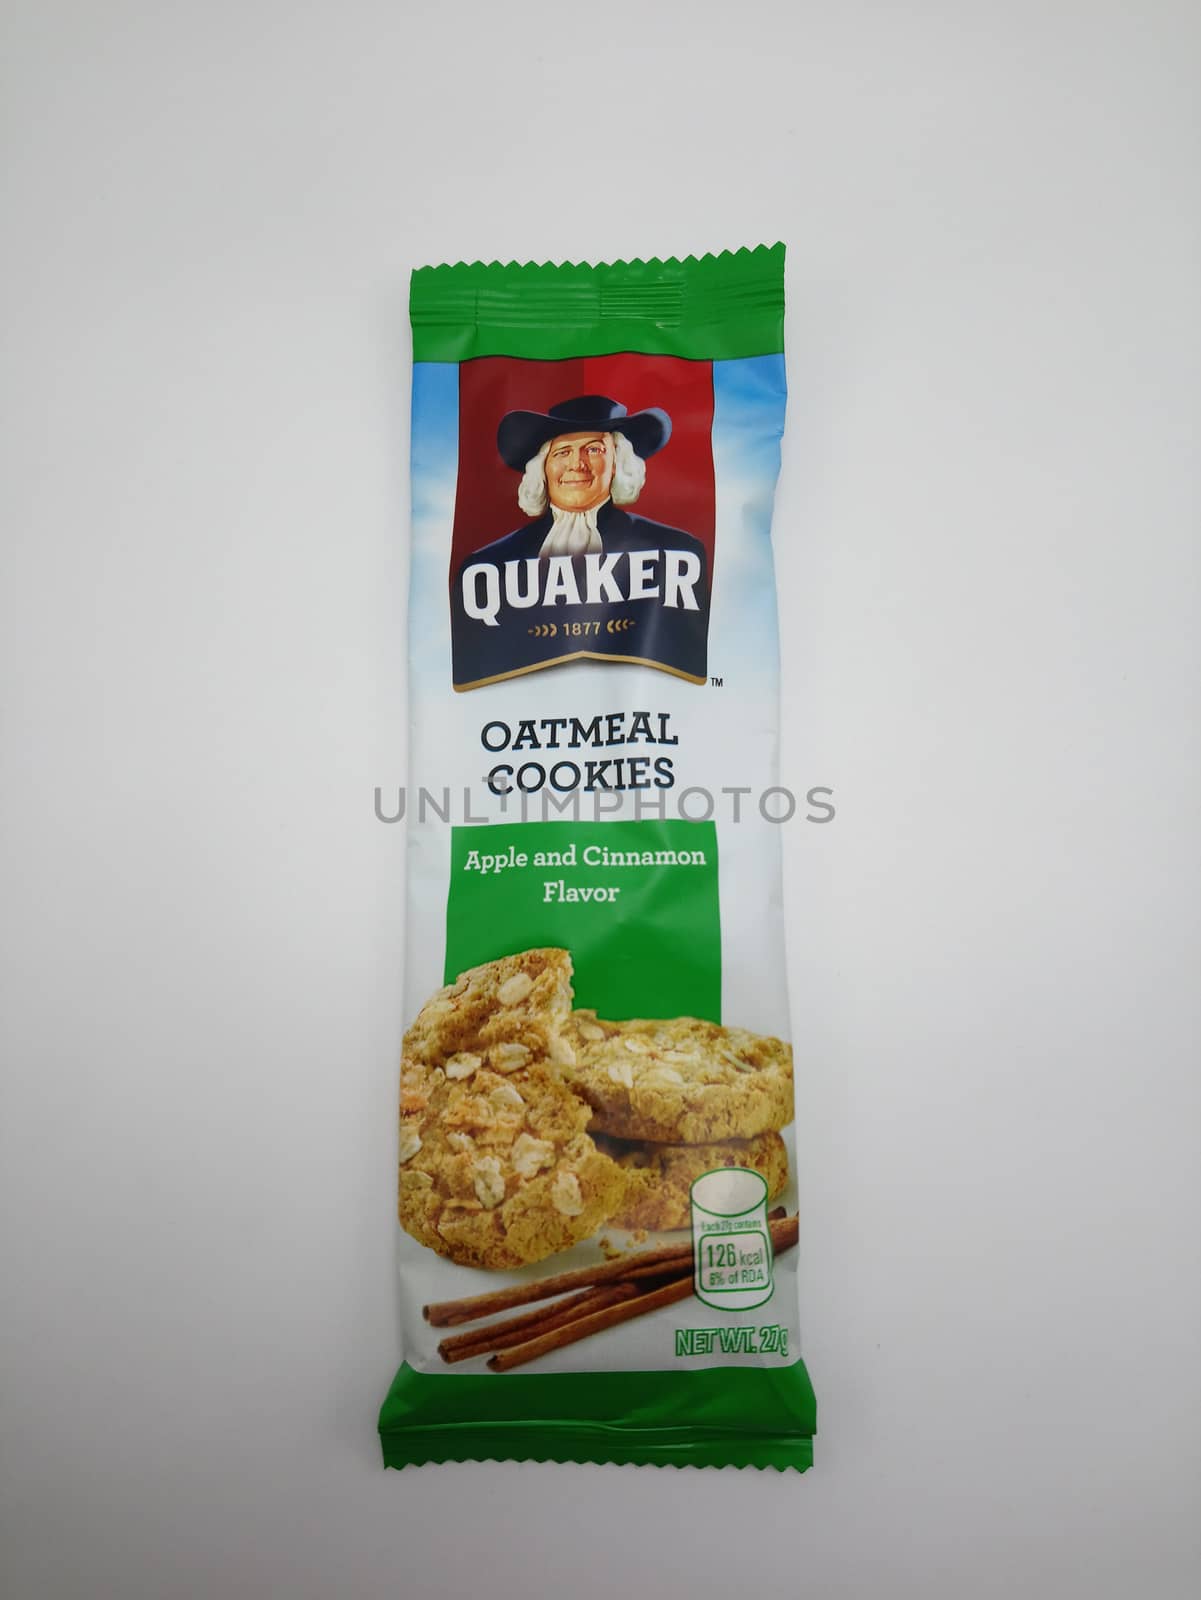 Quaker oatmeal cookies apple and cinnamon flavor in Manila, Phil by imwaltersy